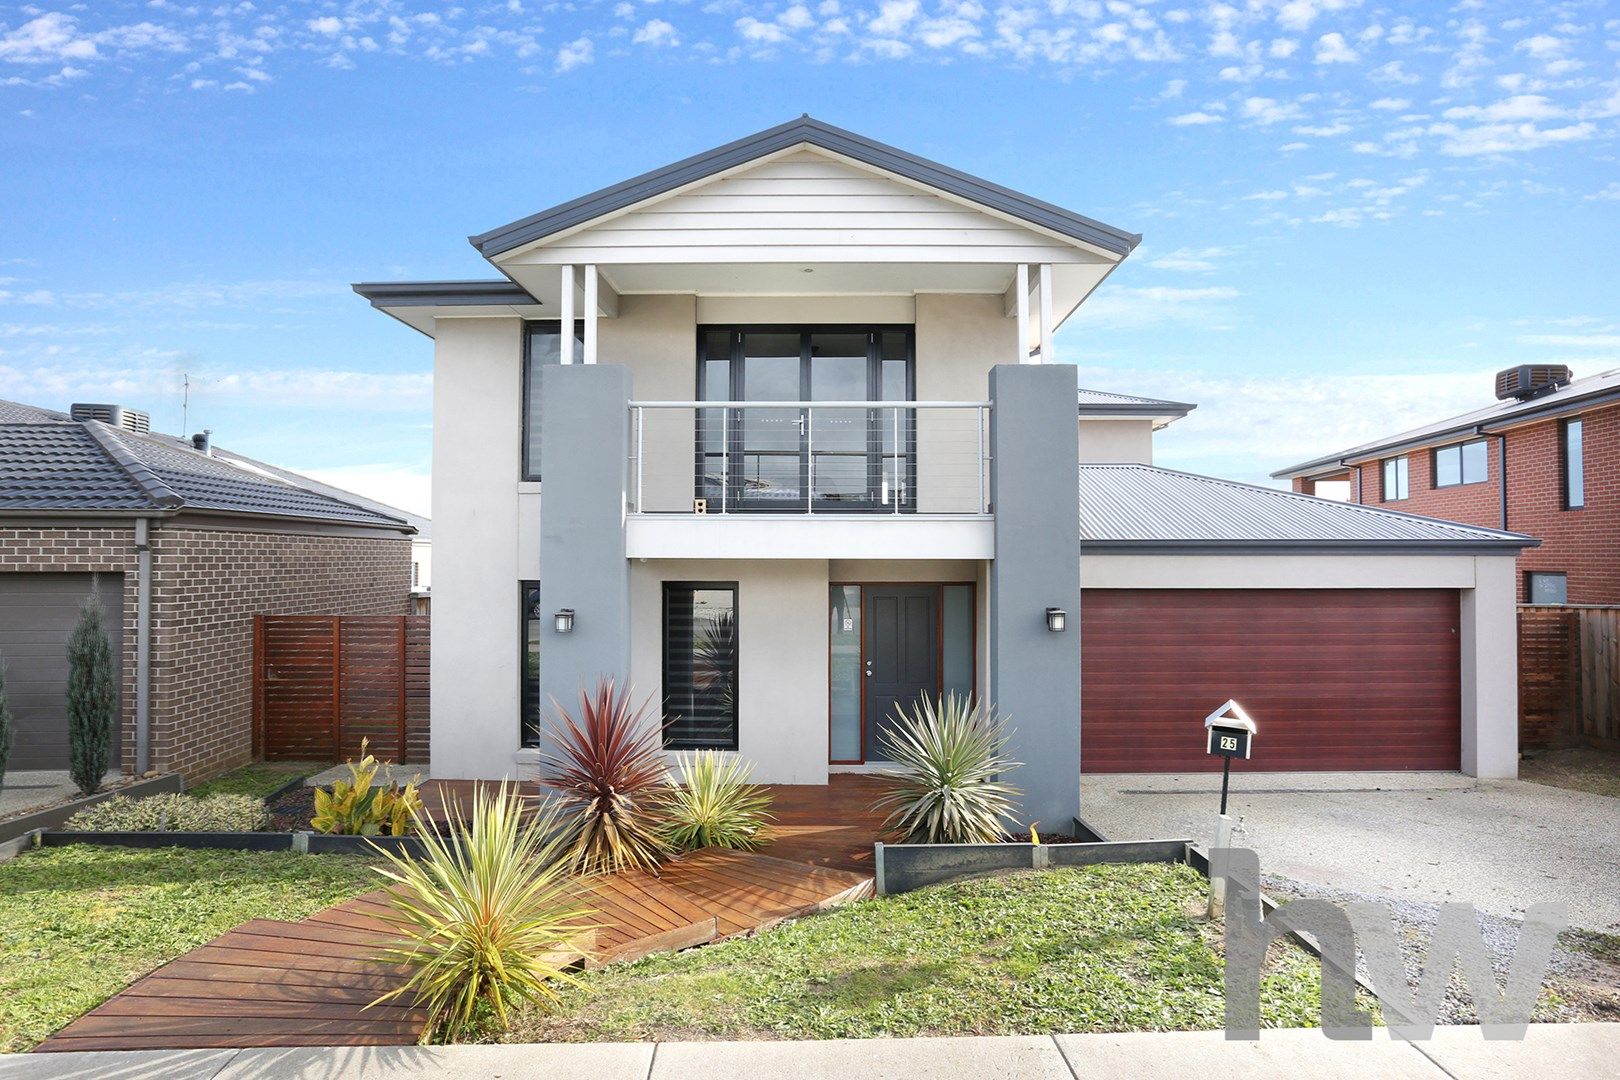 25 Spectacle Way, Leopold VIC 3224, Image 0